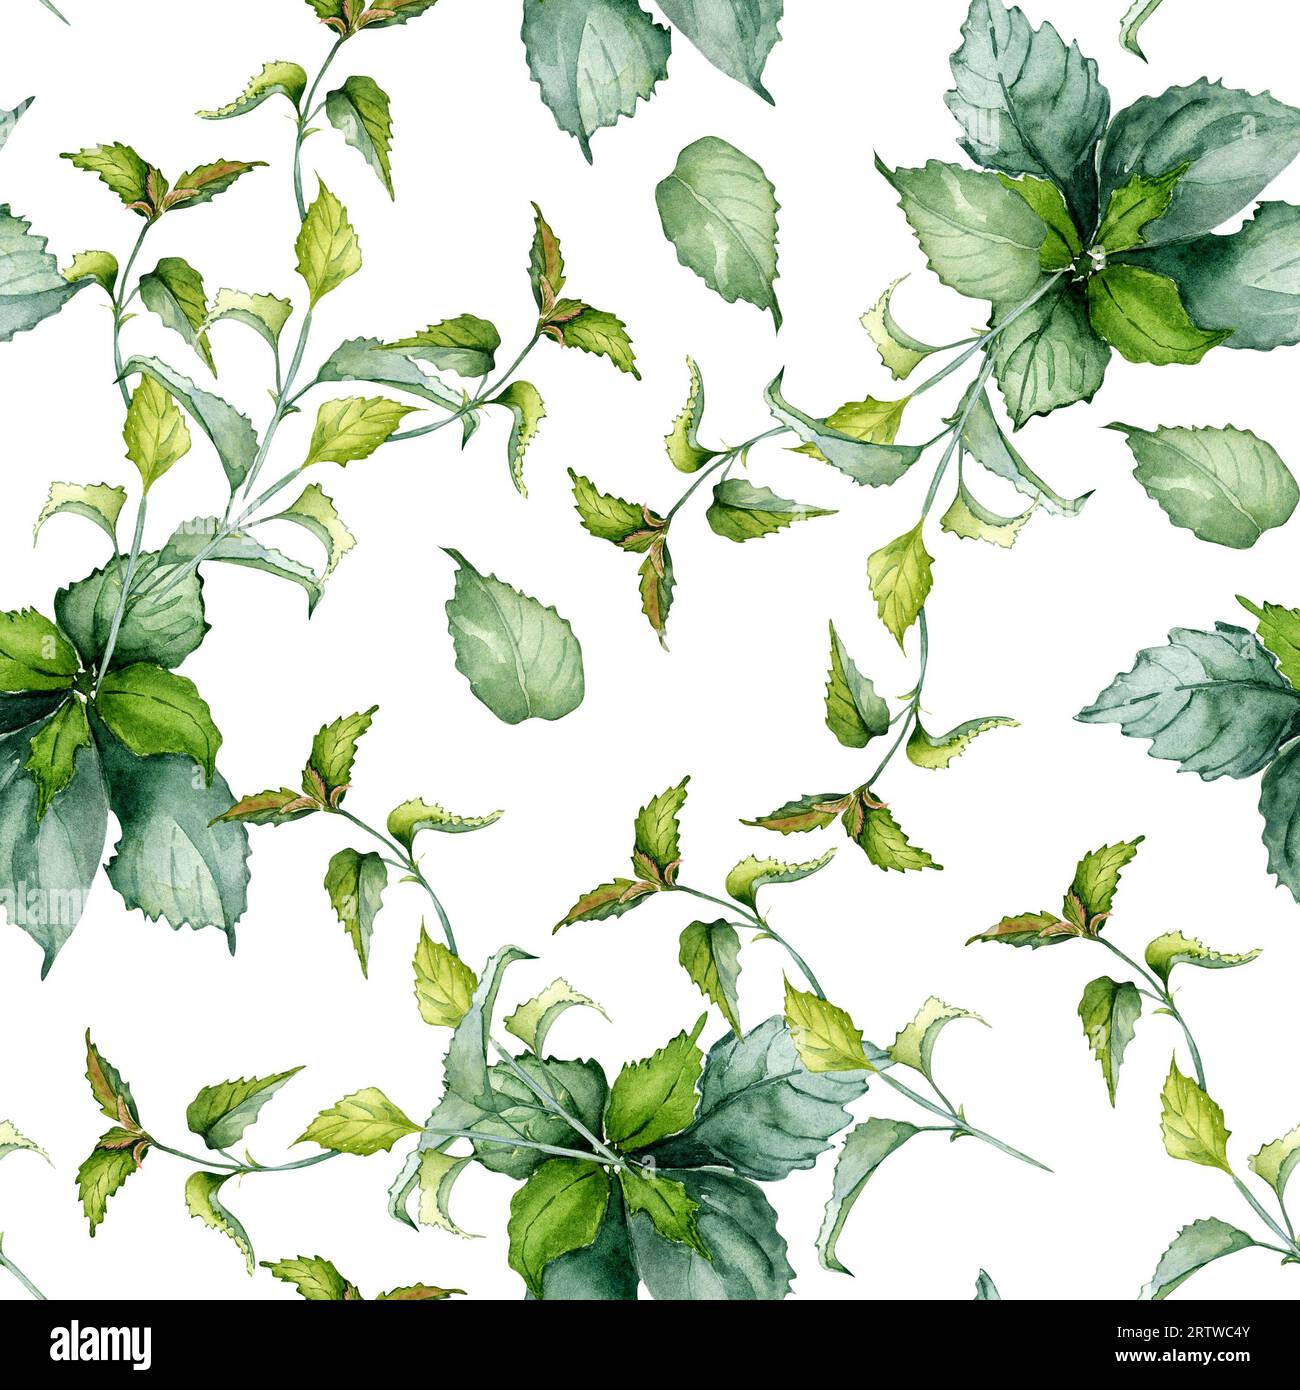 Nettle stem herbal plant watercolor seamless pattern isolated on white background. Urtica dioica, green leaves, useful herb hand drawn. Design for Stock Photo